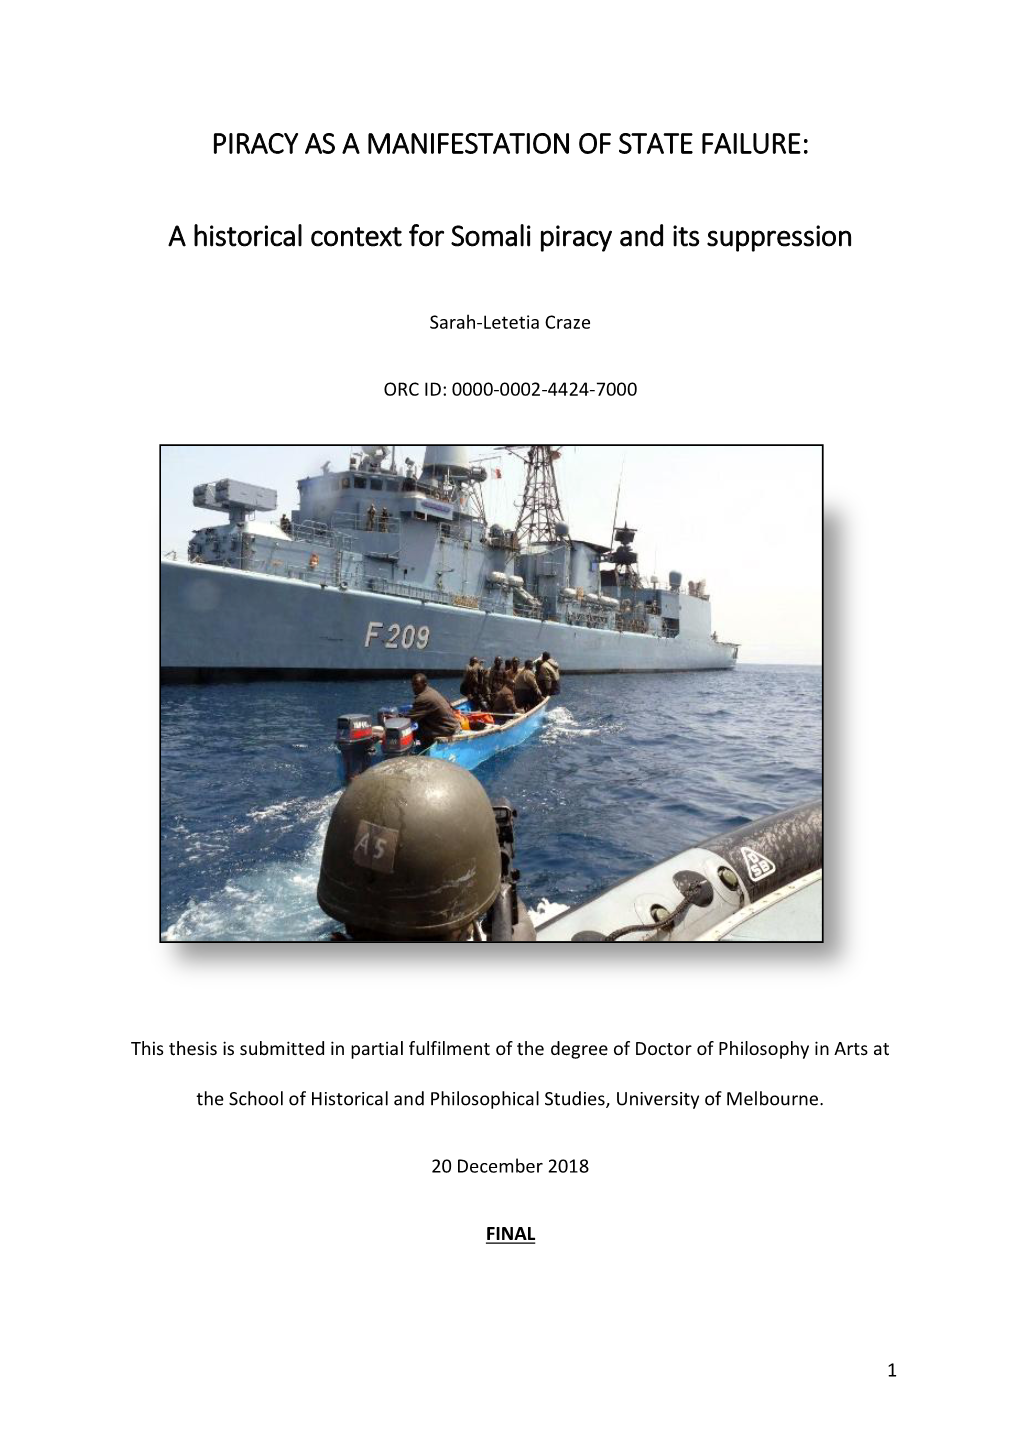 A Historical Context for Somali Piracy and Its Suppression